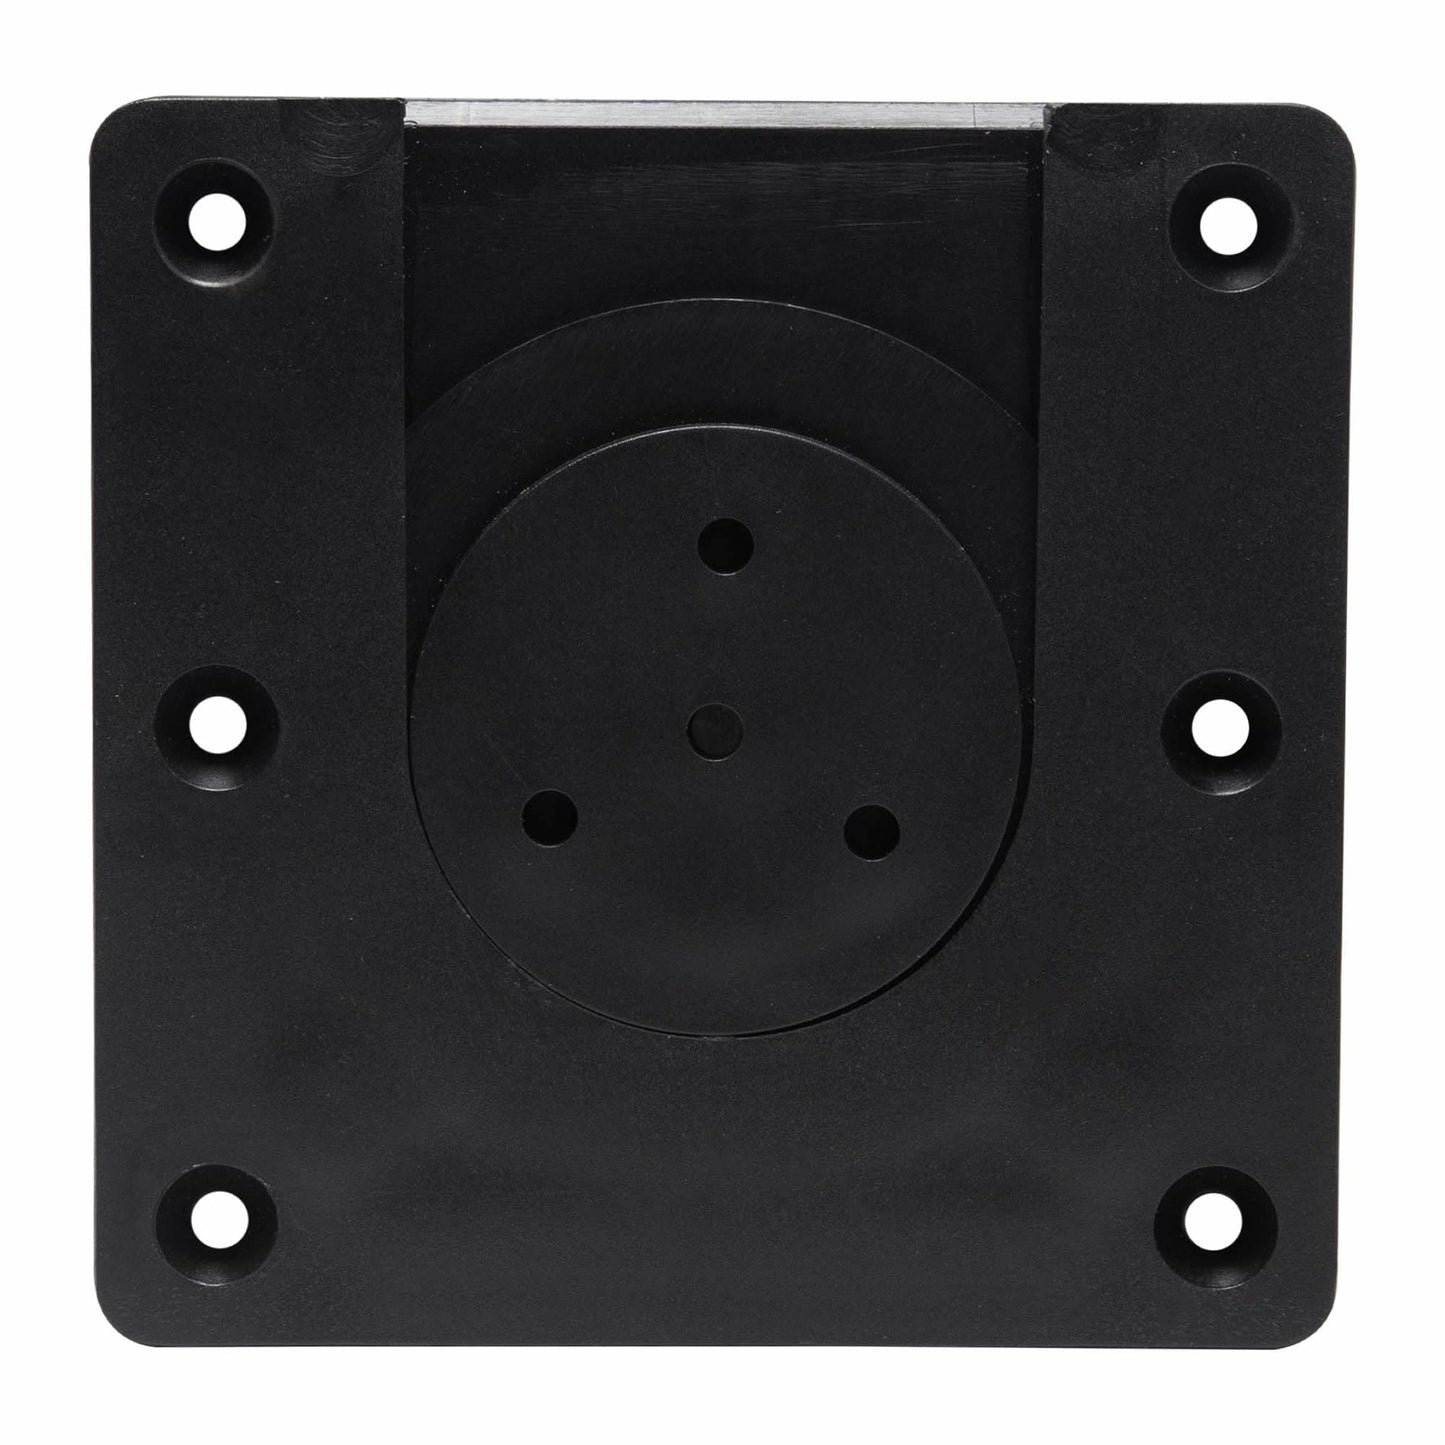 Ruthless Dartboard Bracket - Easy Rotate - Wall Mounting - includes Fixings - Black